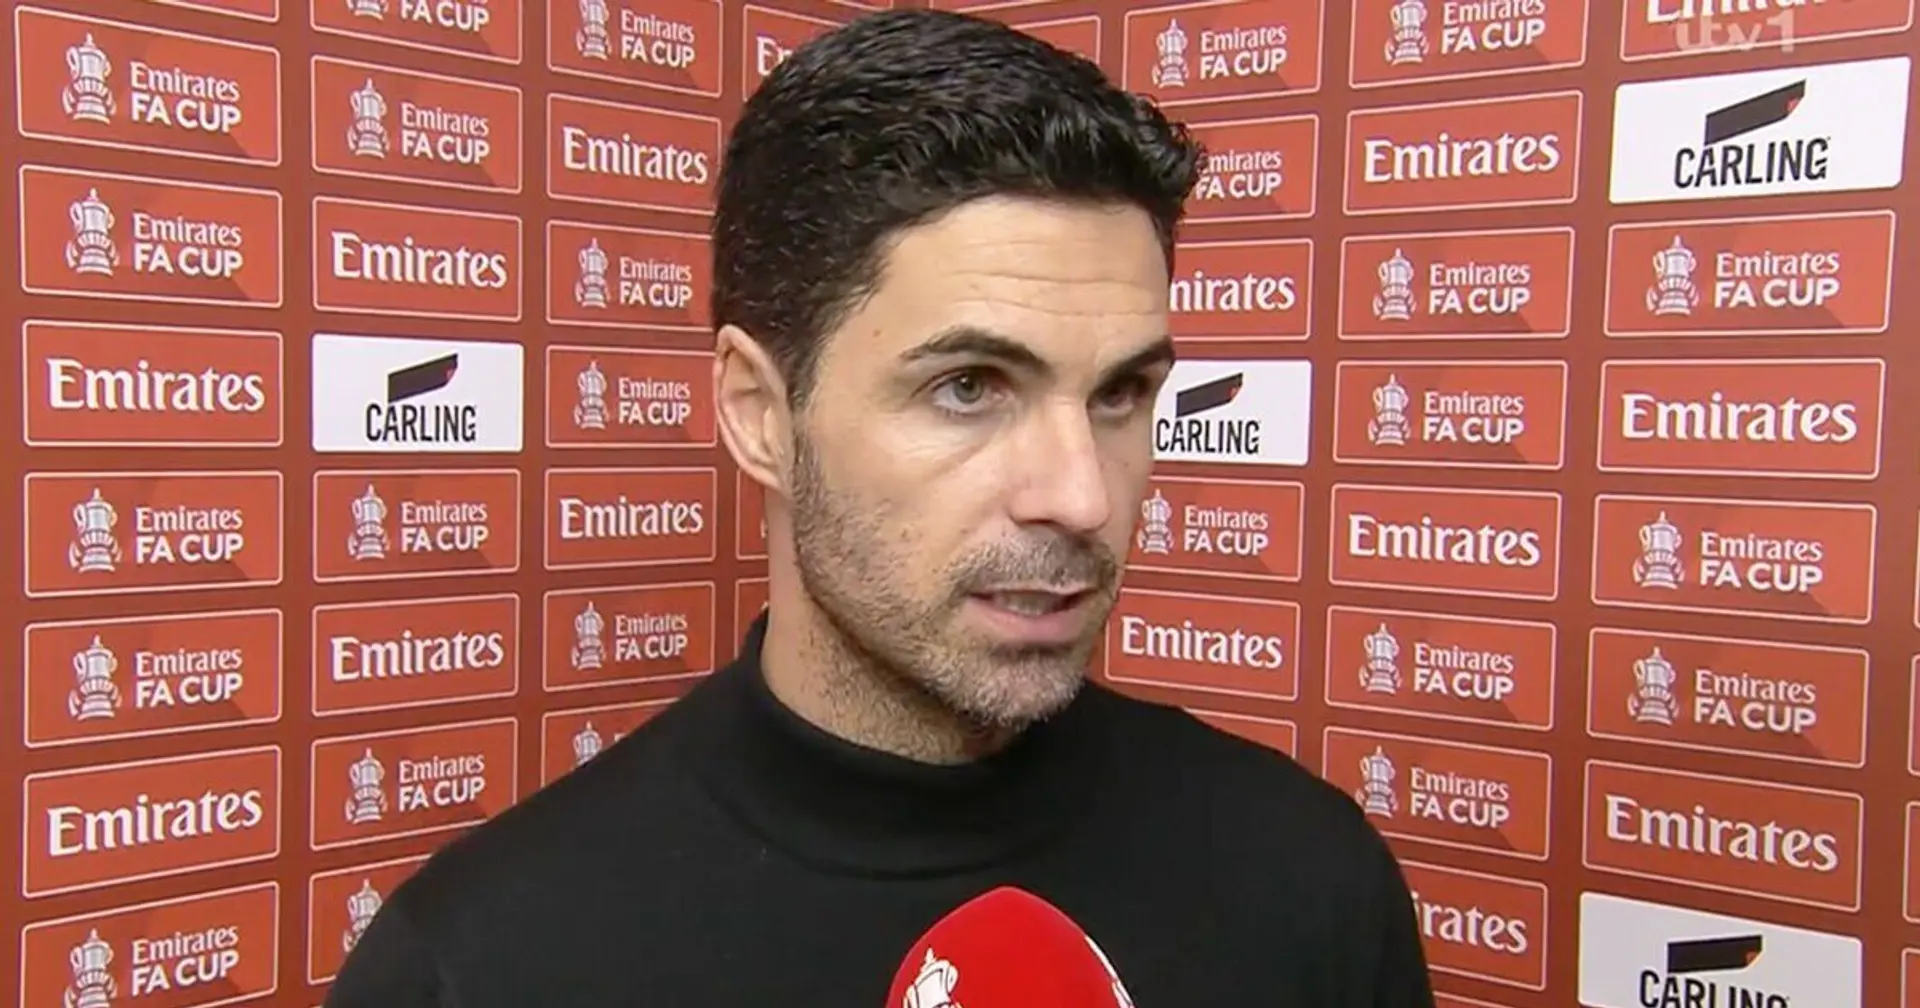 'We could have got much more from the game': Arteta on loss to City